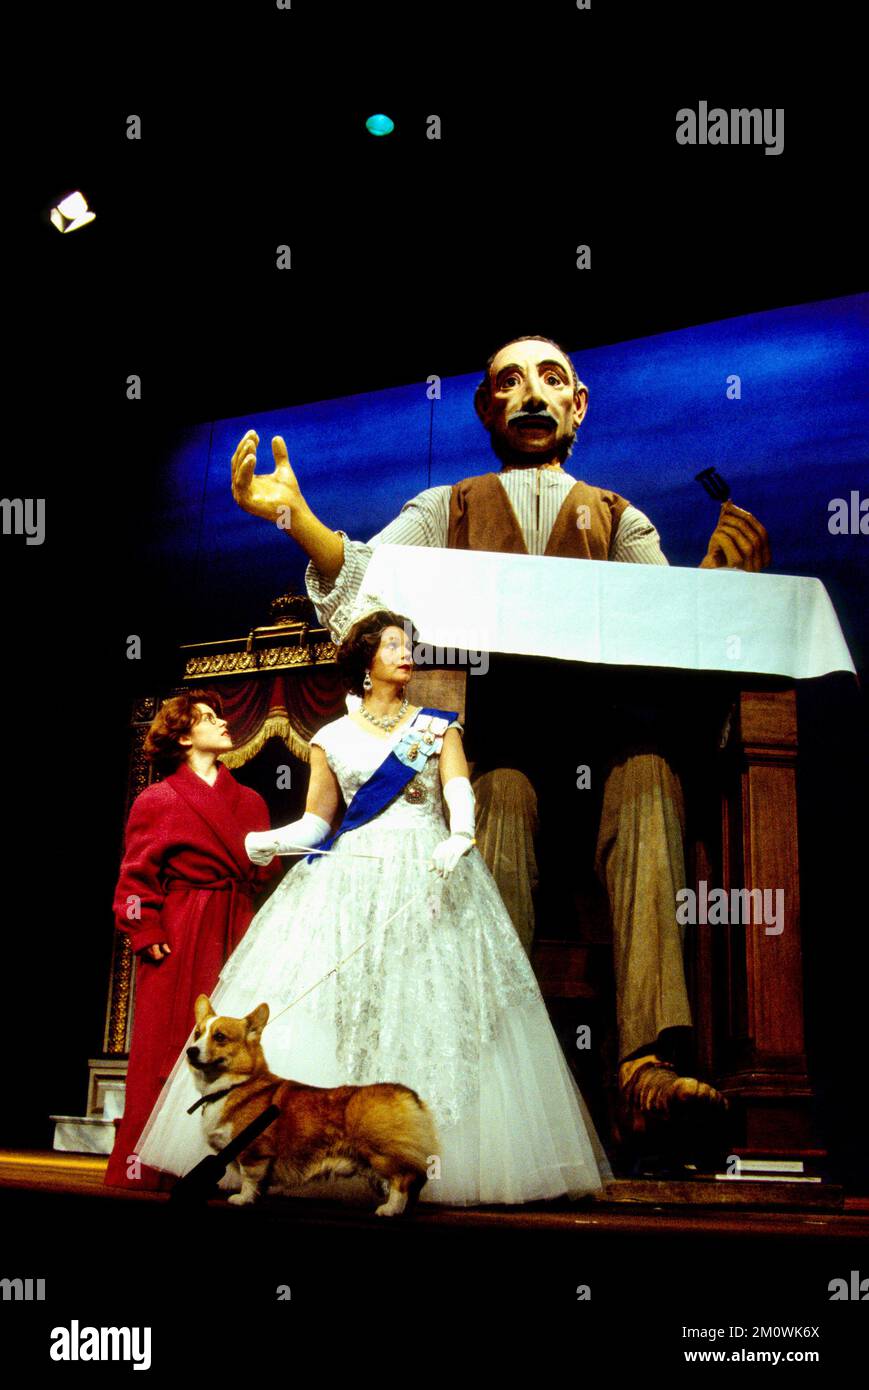 Ruby Evans (Sophie), Marcia King (The Queen) with Claude the corgi in THE BFG (BIG FRIENDLY GIANT) by Roald Dahl at the Albery Theatre, London SW19  23/11/1993  adapted & directed by David Wood  design: Susie Caulcutt Stock Photo